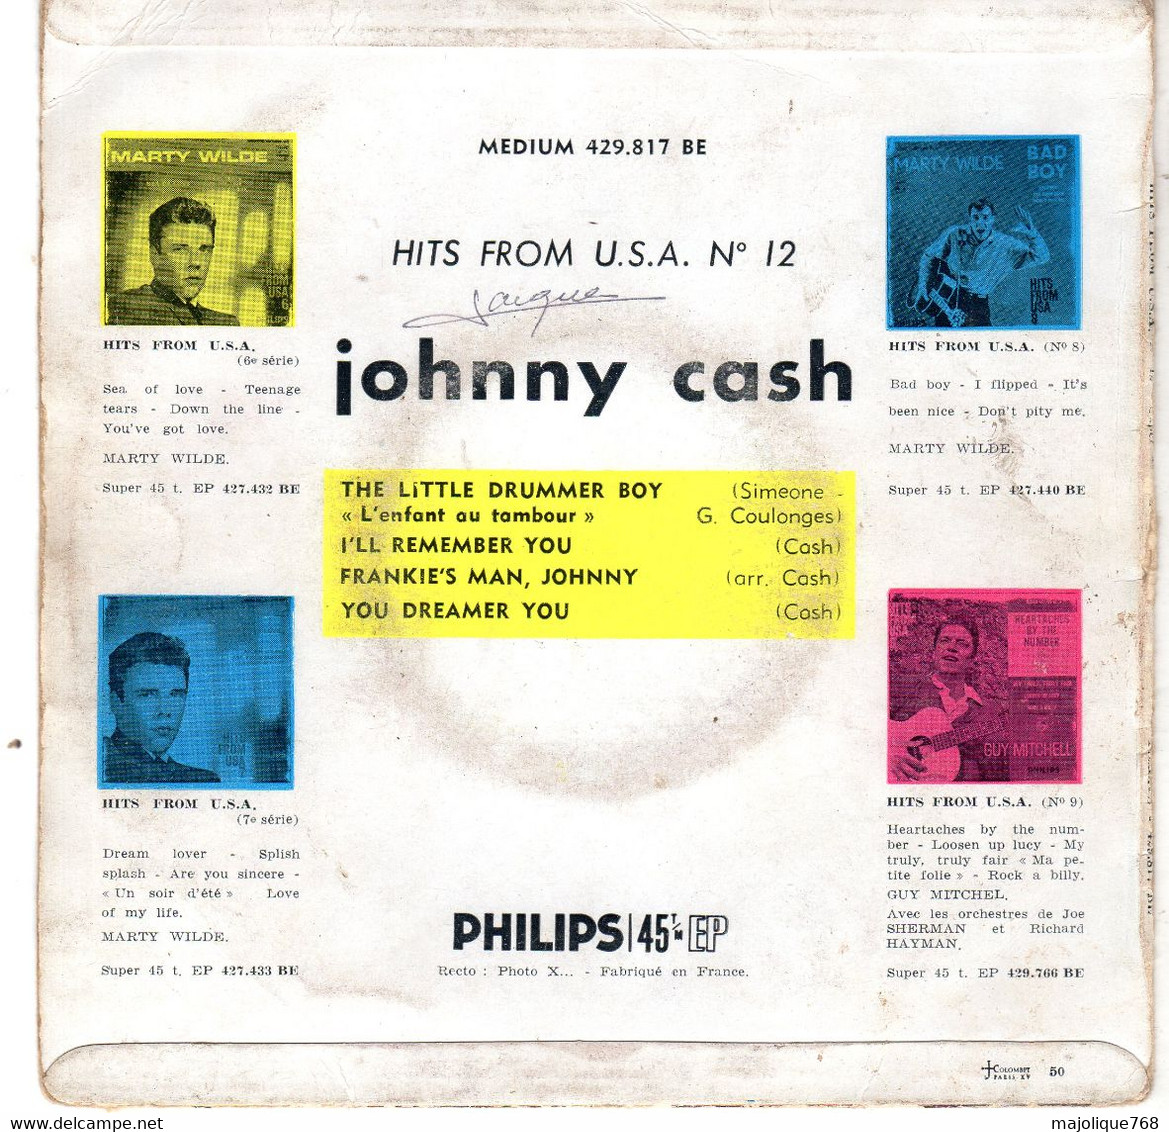 Disque De Johnny Cash - The Little Drummer Boy - Philips 429 817 BE - France 1960 - Country Y Folk